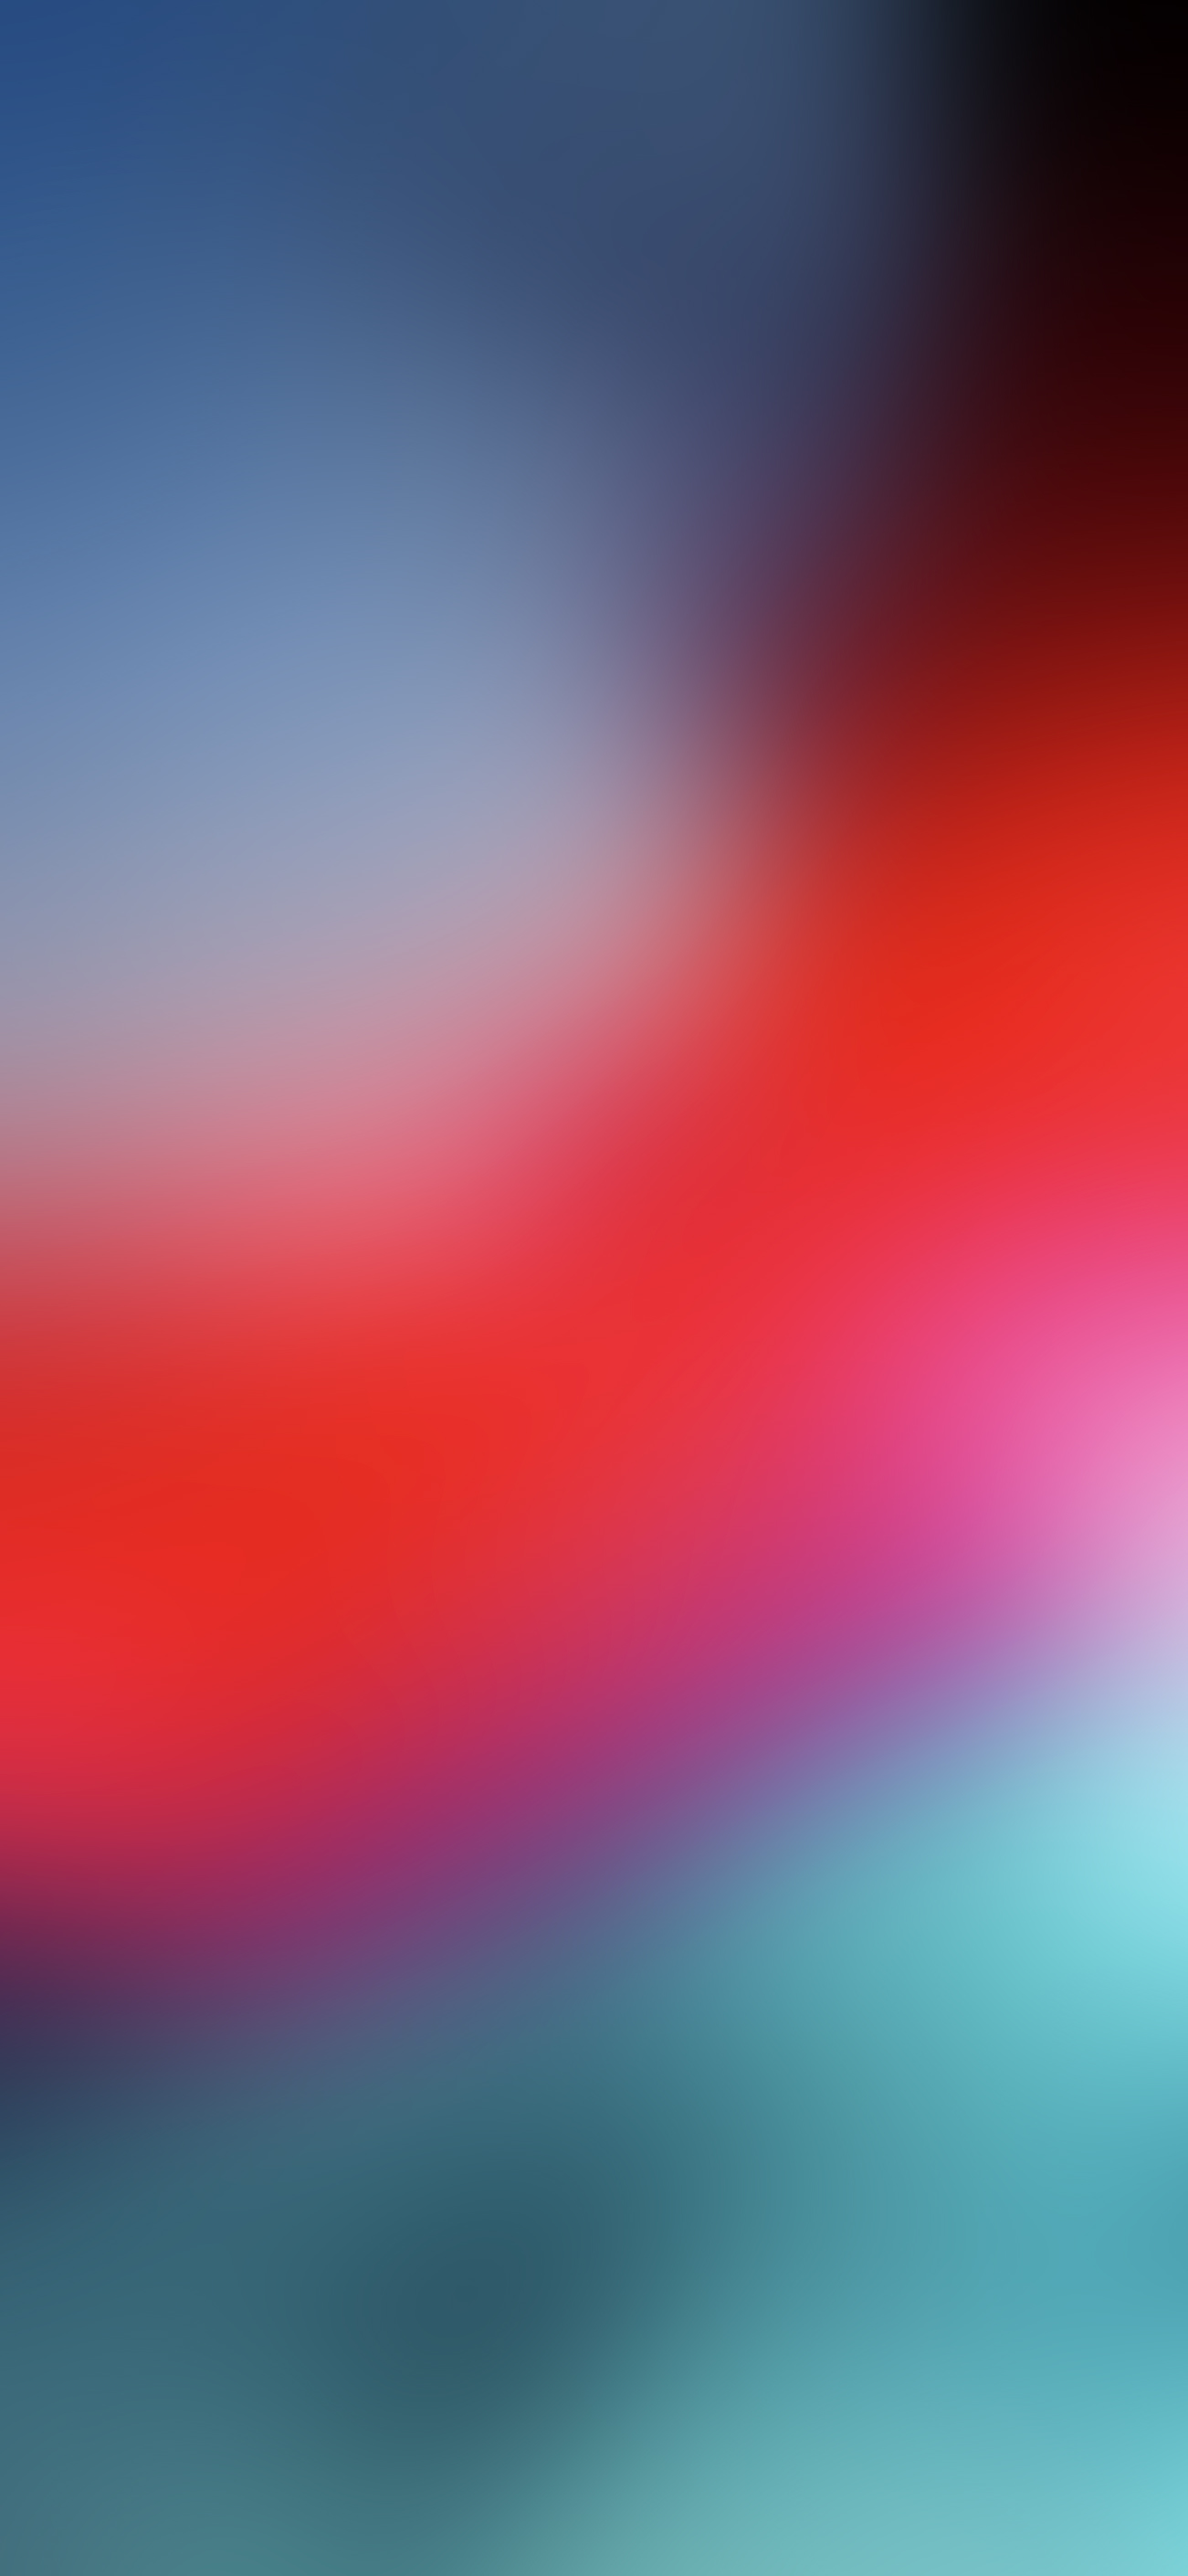  Blurred  iOS 12 Stock Wallpaper  Wallpapers  Central